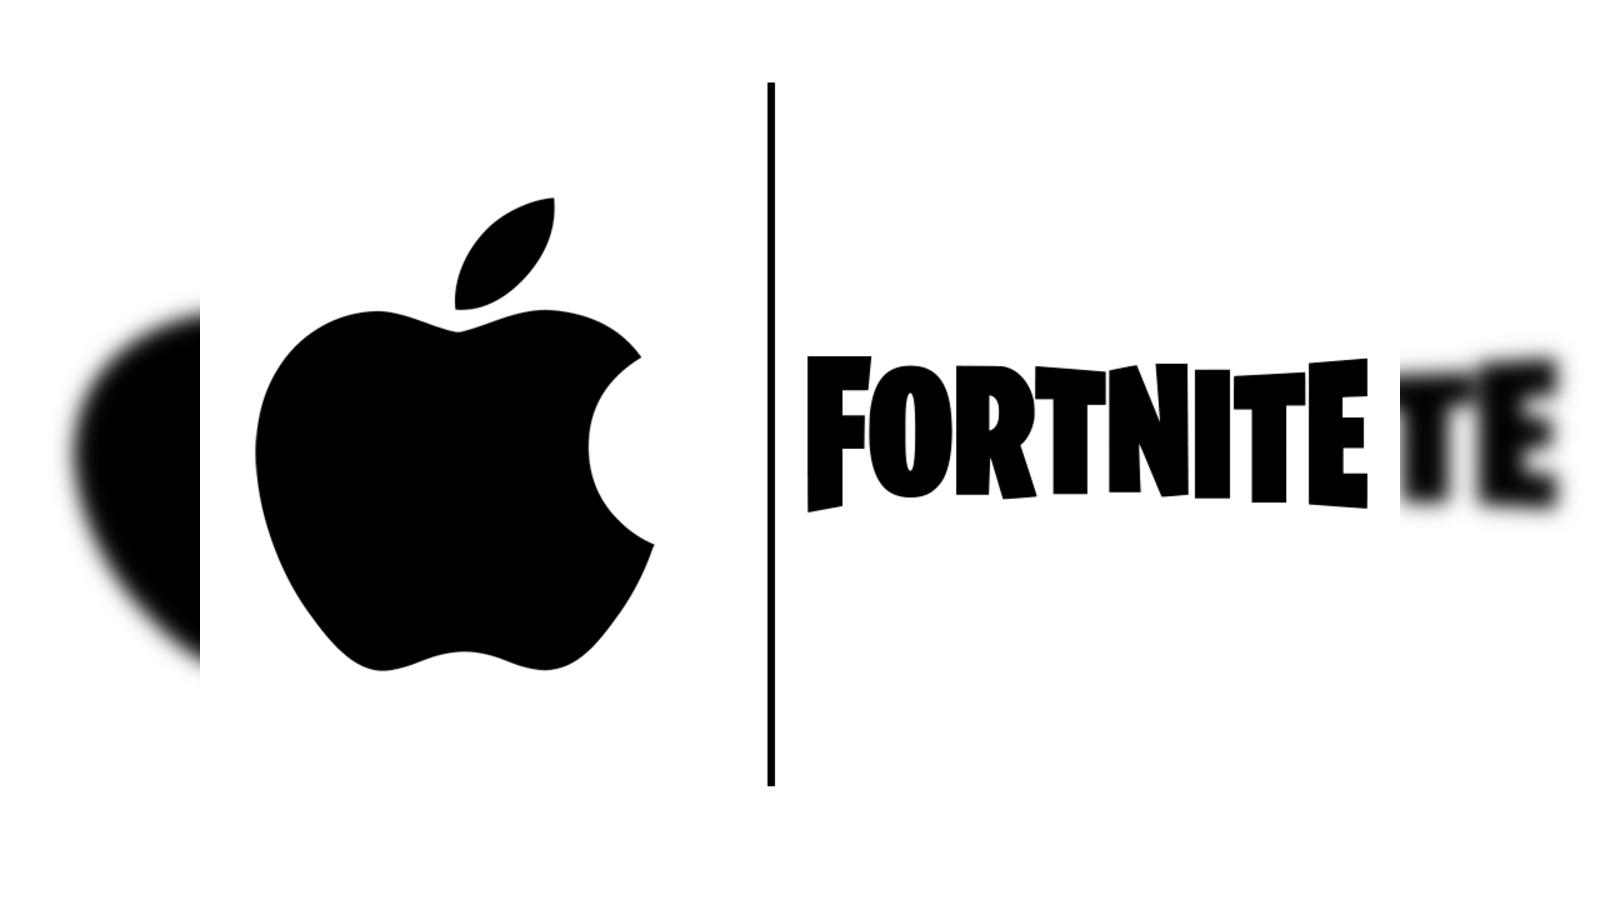 Epic Games Loses Again on Restoring Fortnite to Apple Store - Bloomberg